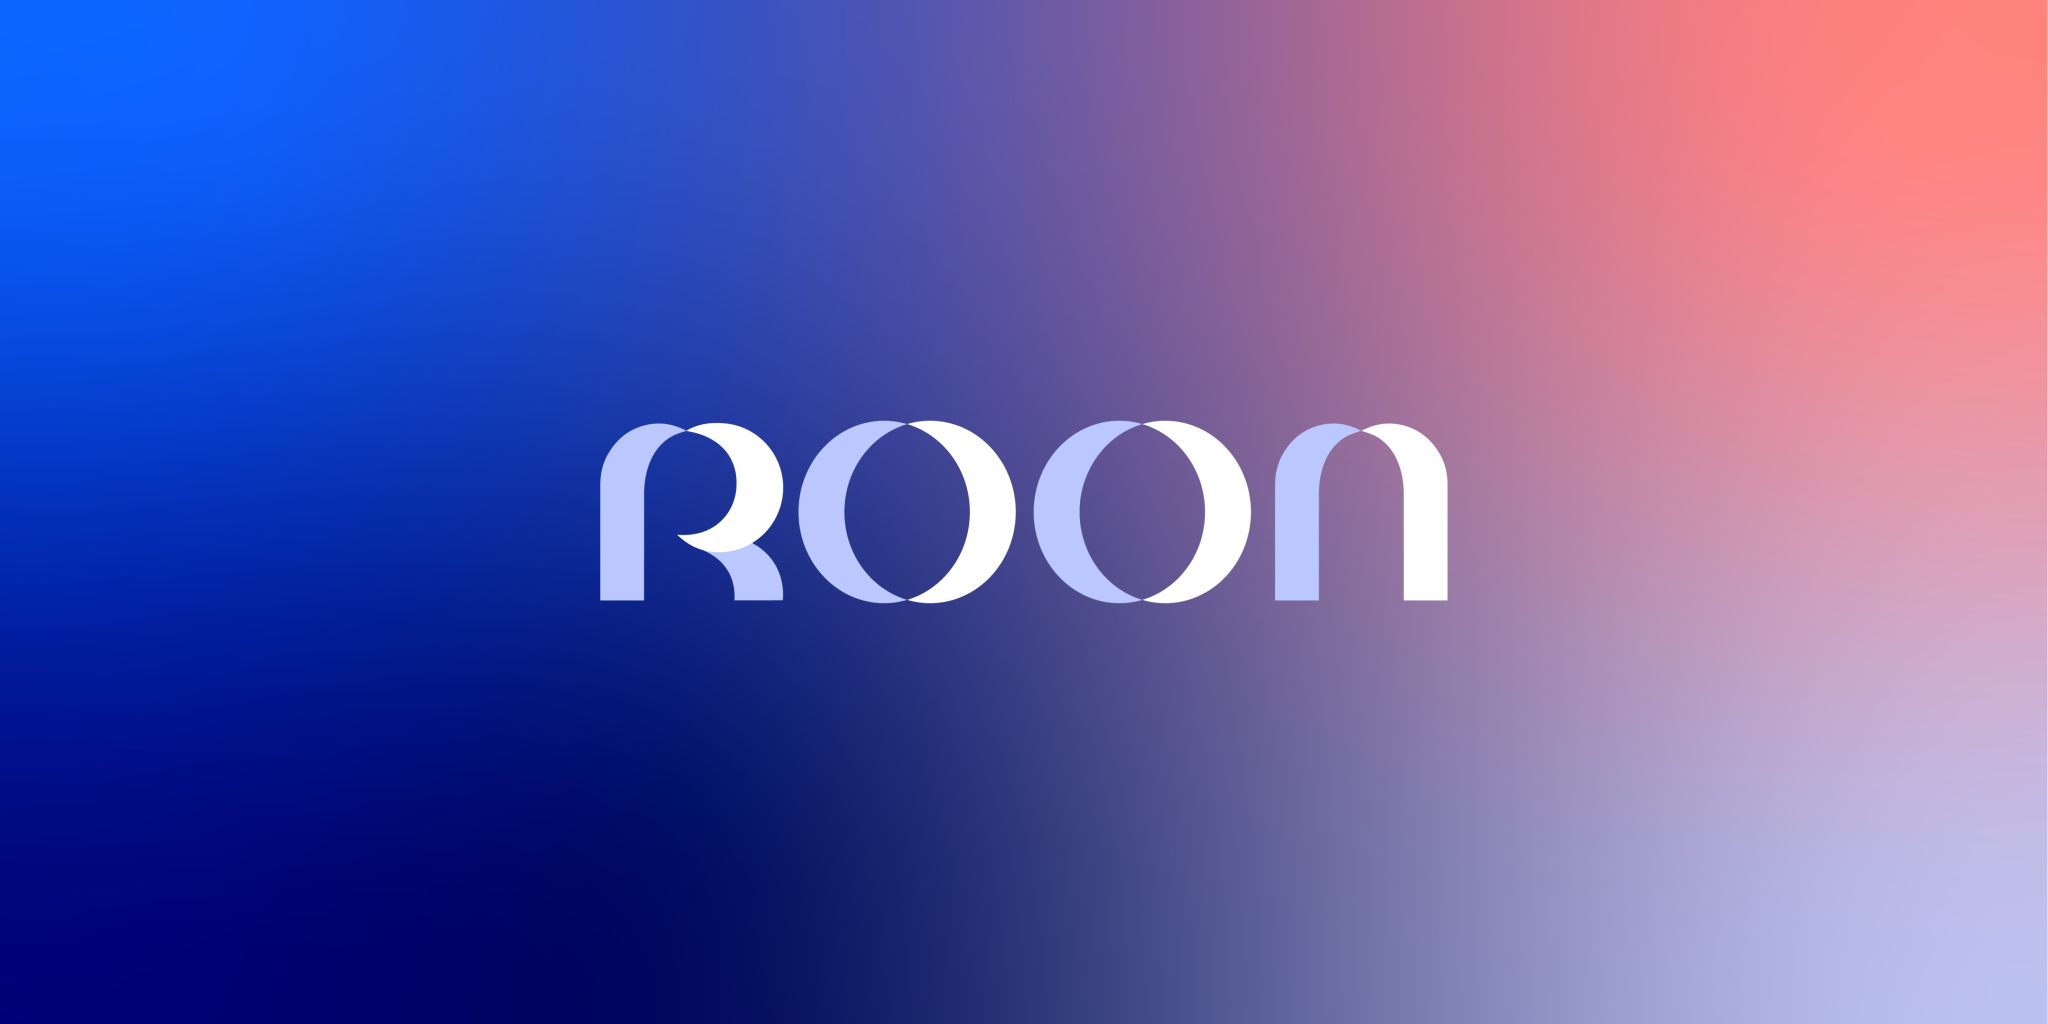 Roon